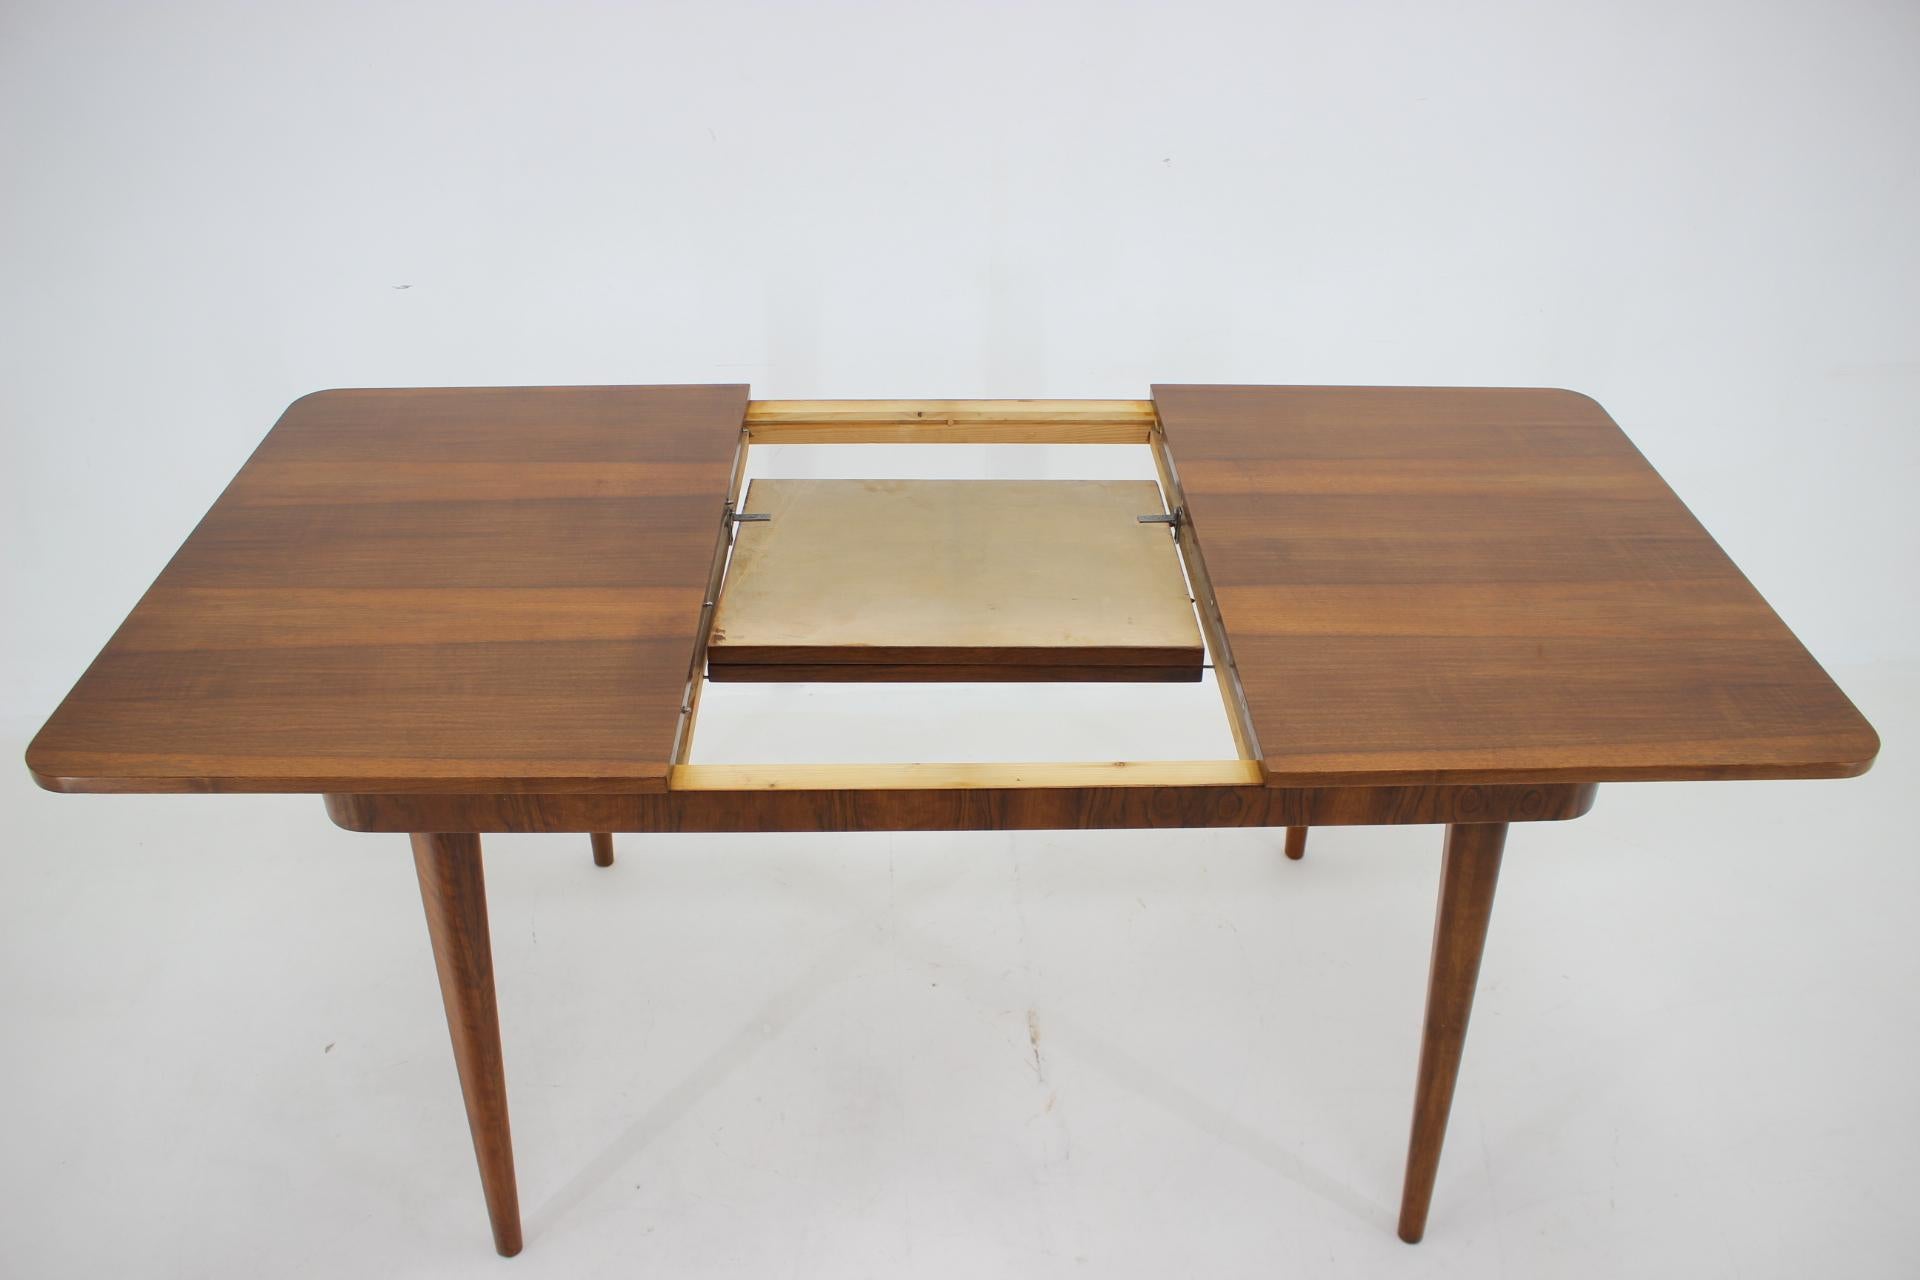 1950s Extendable Dining Table in Walnut by UP zavody, Czechoslovakia For Sale 4